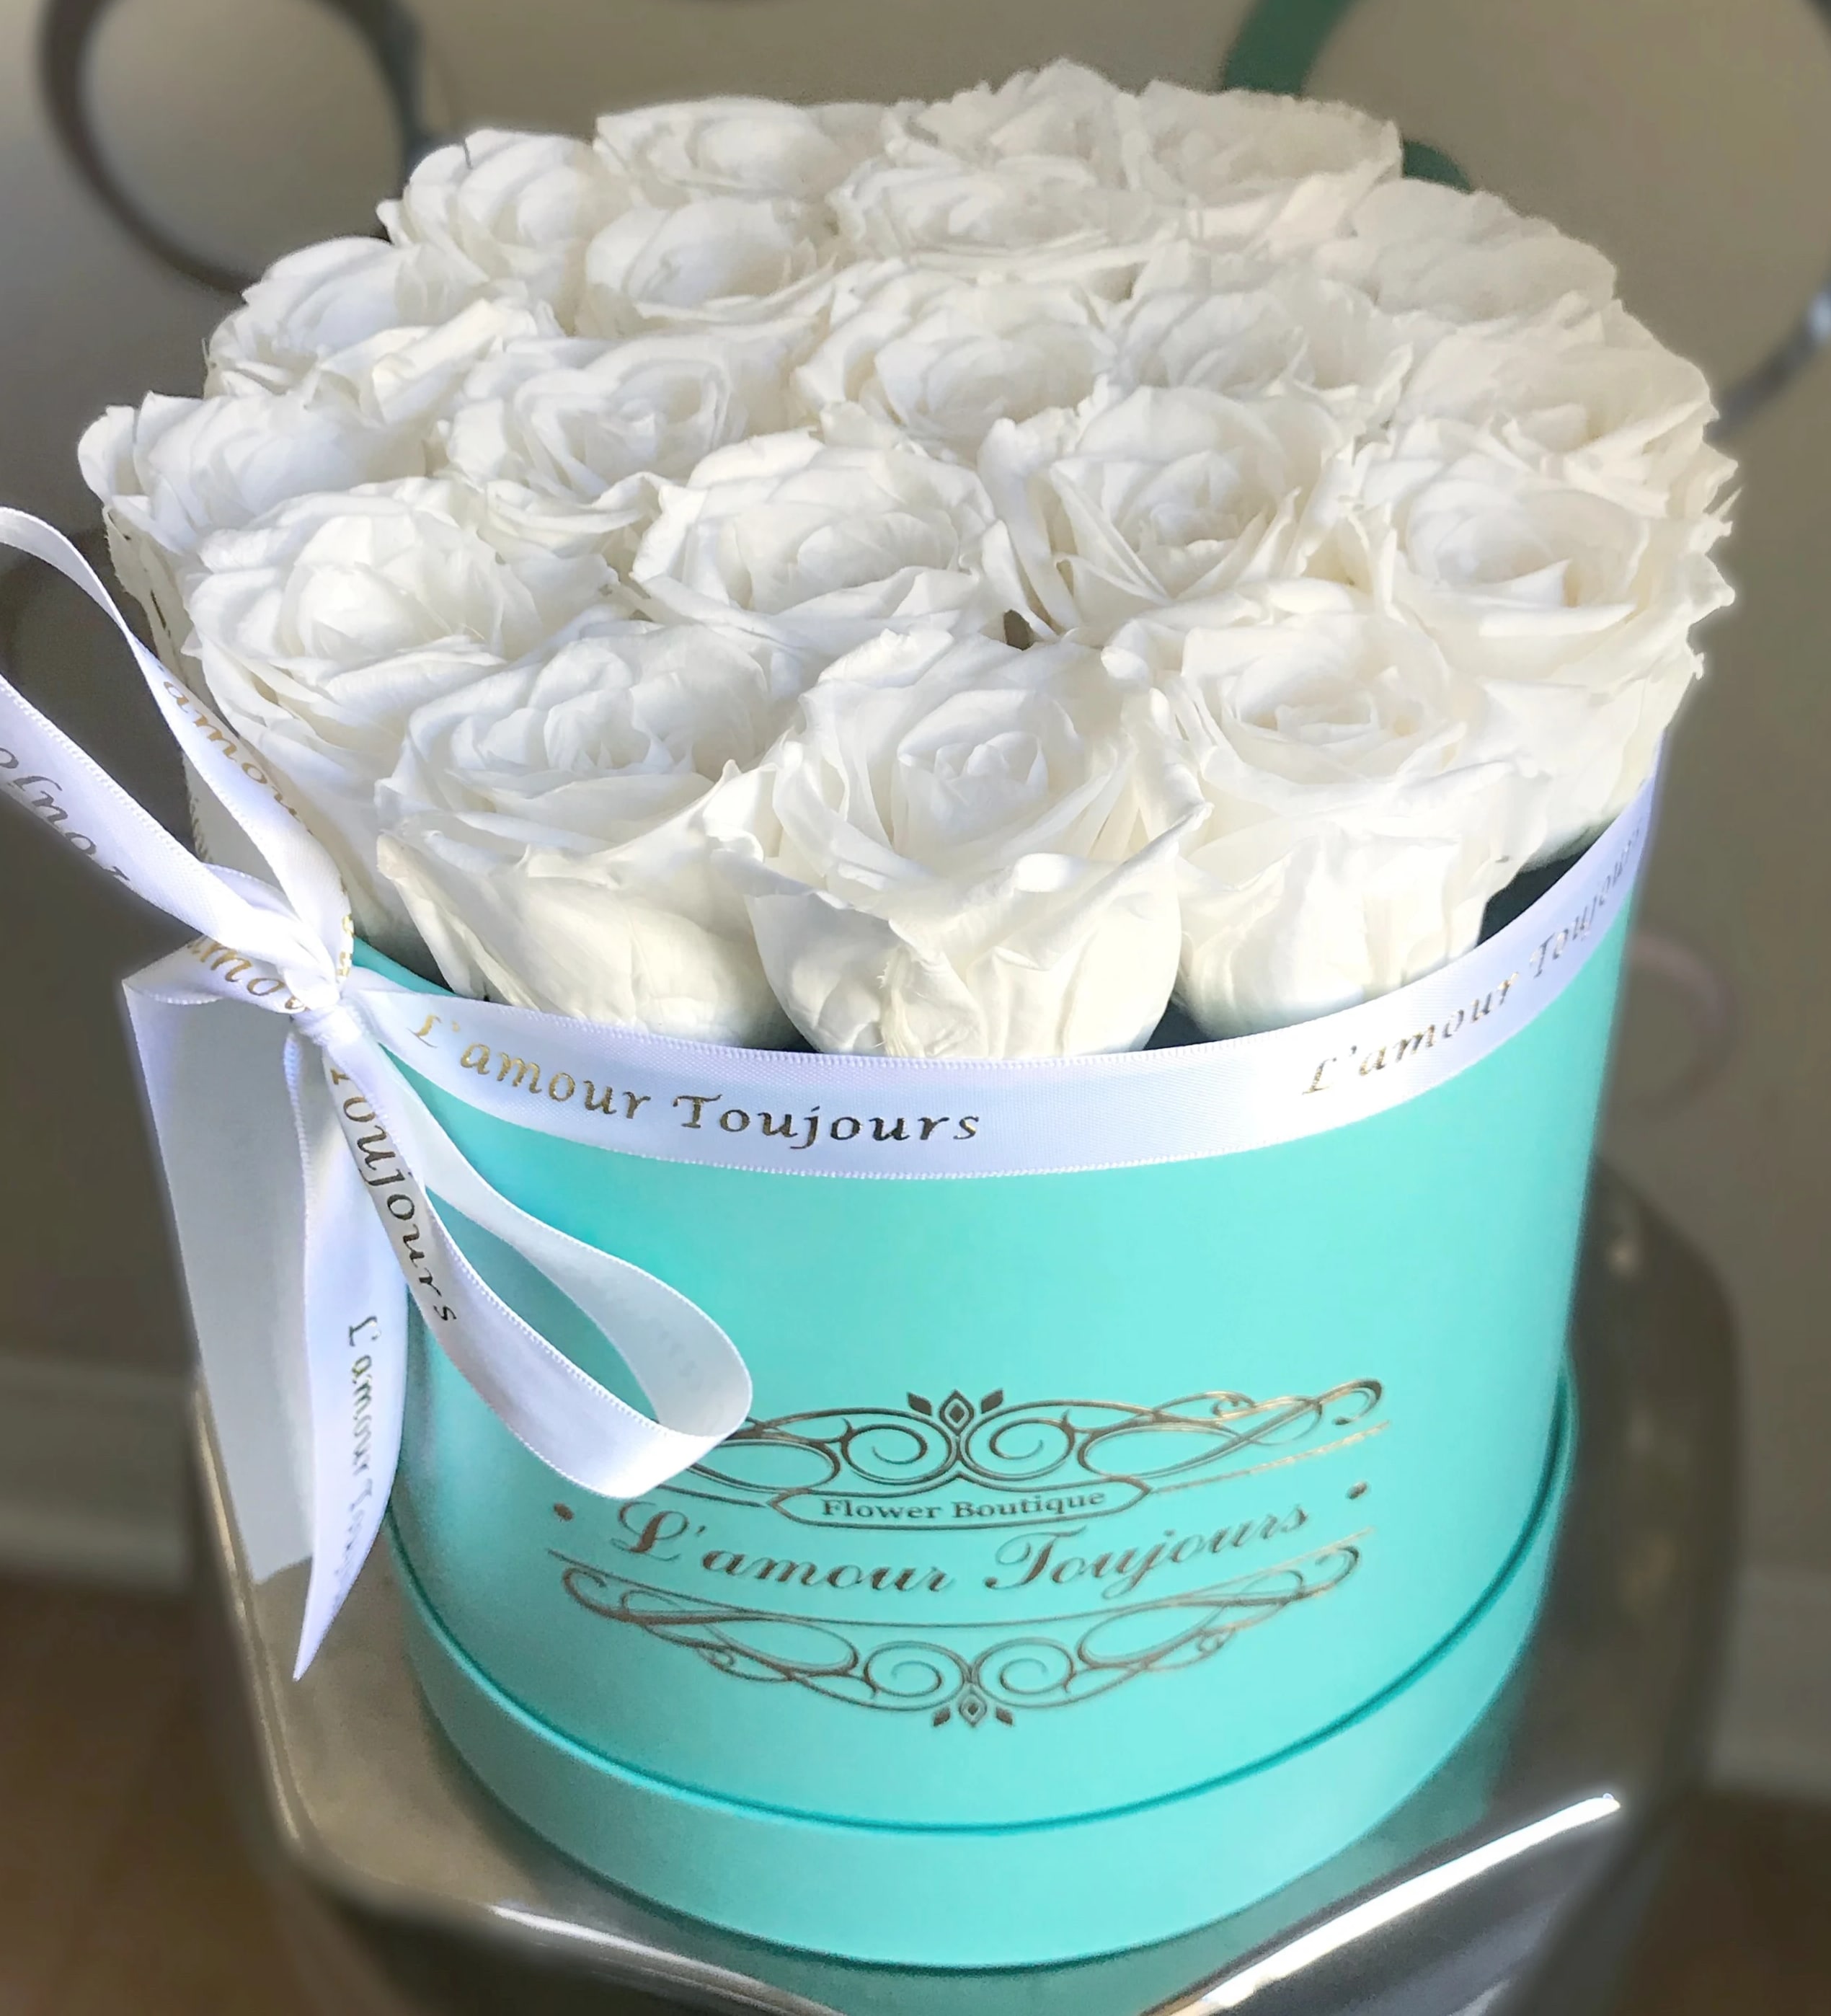 Everlasting Roses Signature Box White Real Roses That Last Up To 3 Years By L Amour Toujours Flower Boutique